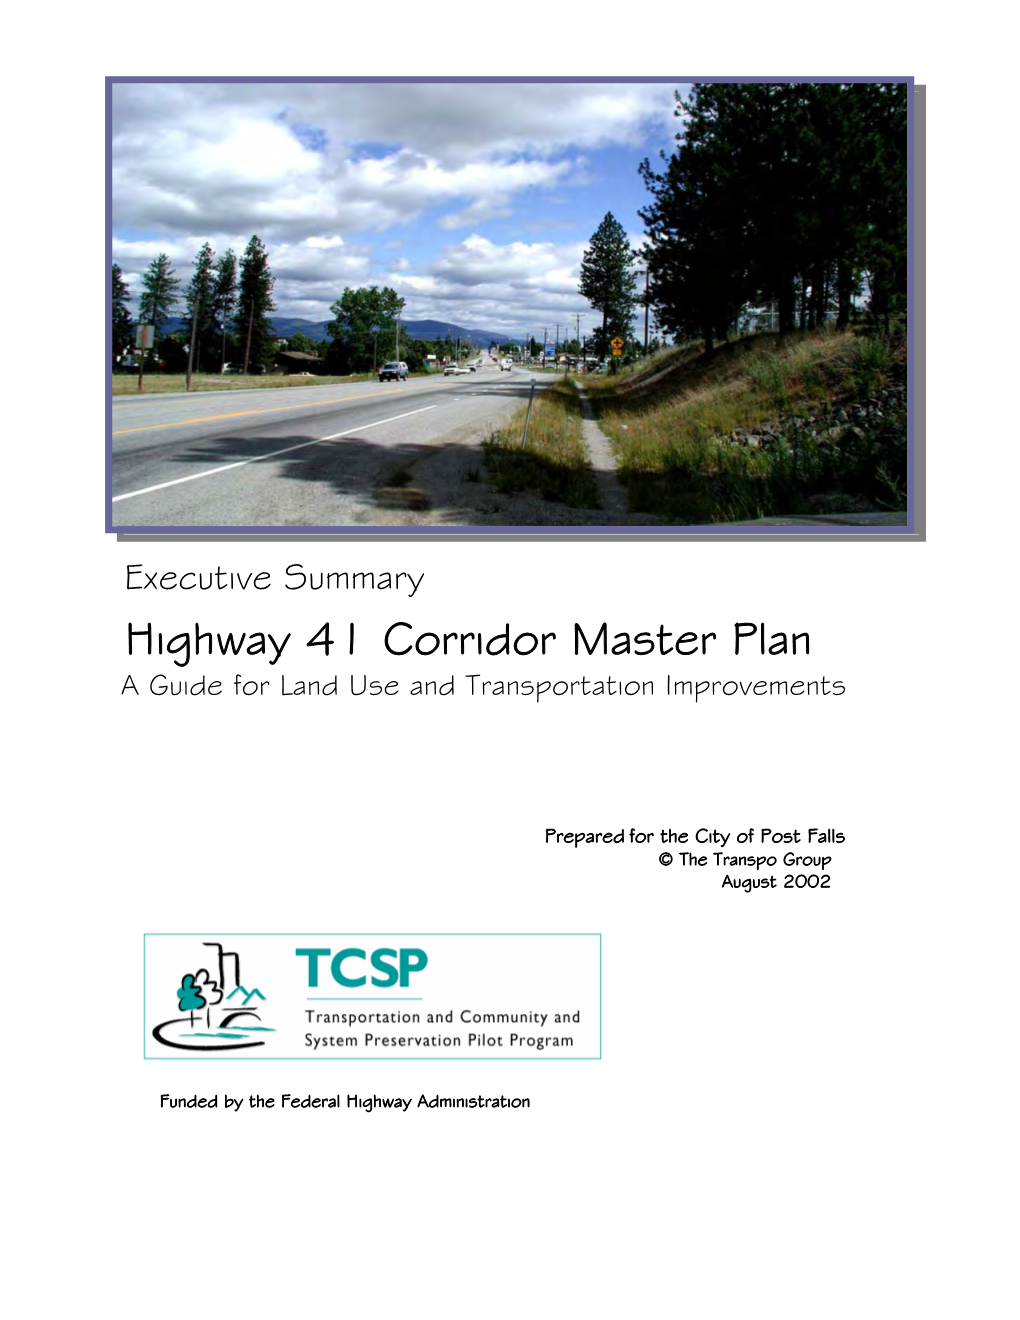 Highway 41 Corridor Master Plan a Guide for Land Use and Transportation Improvements